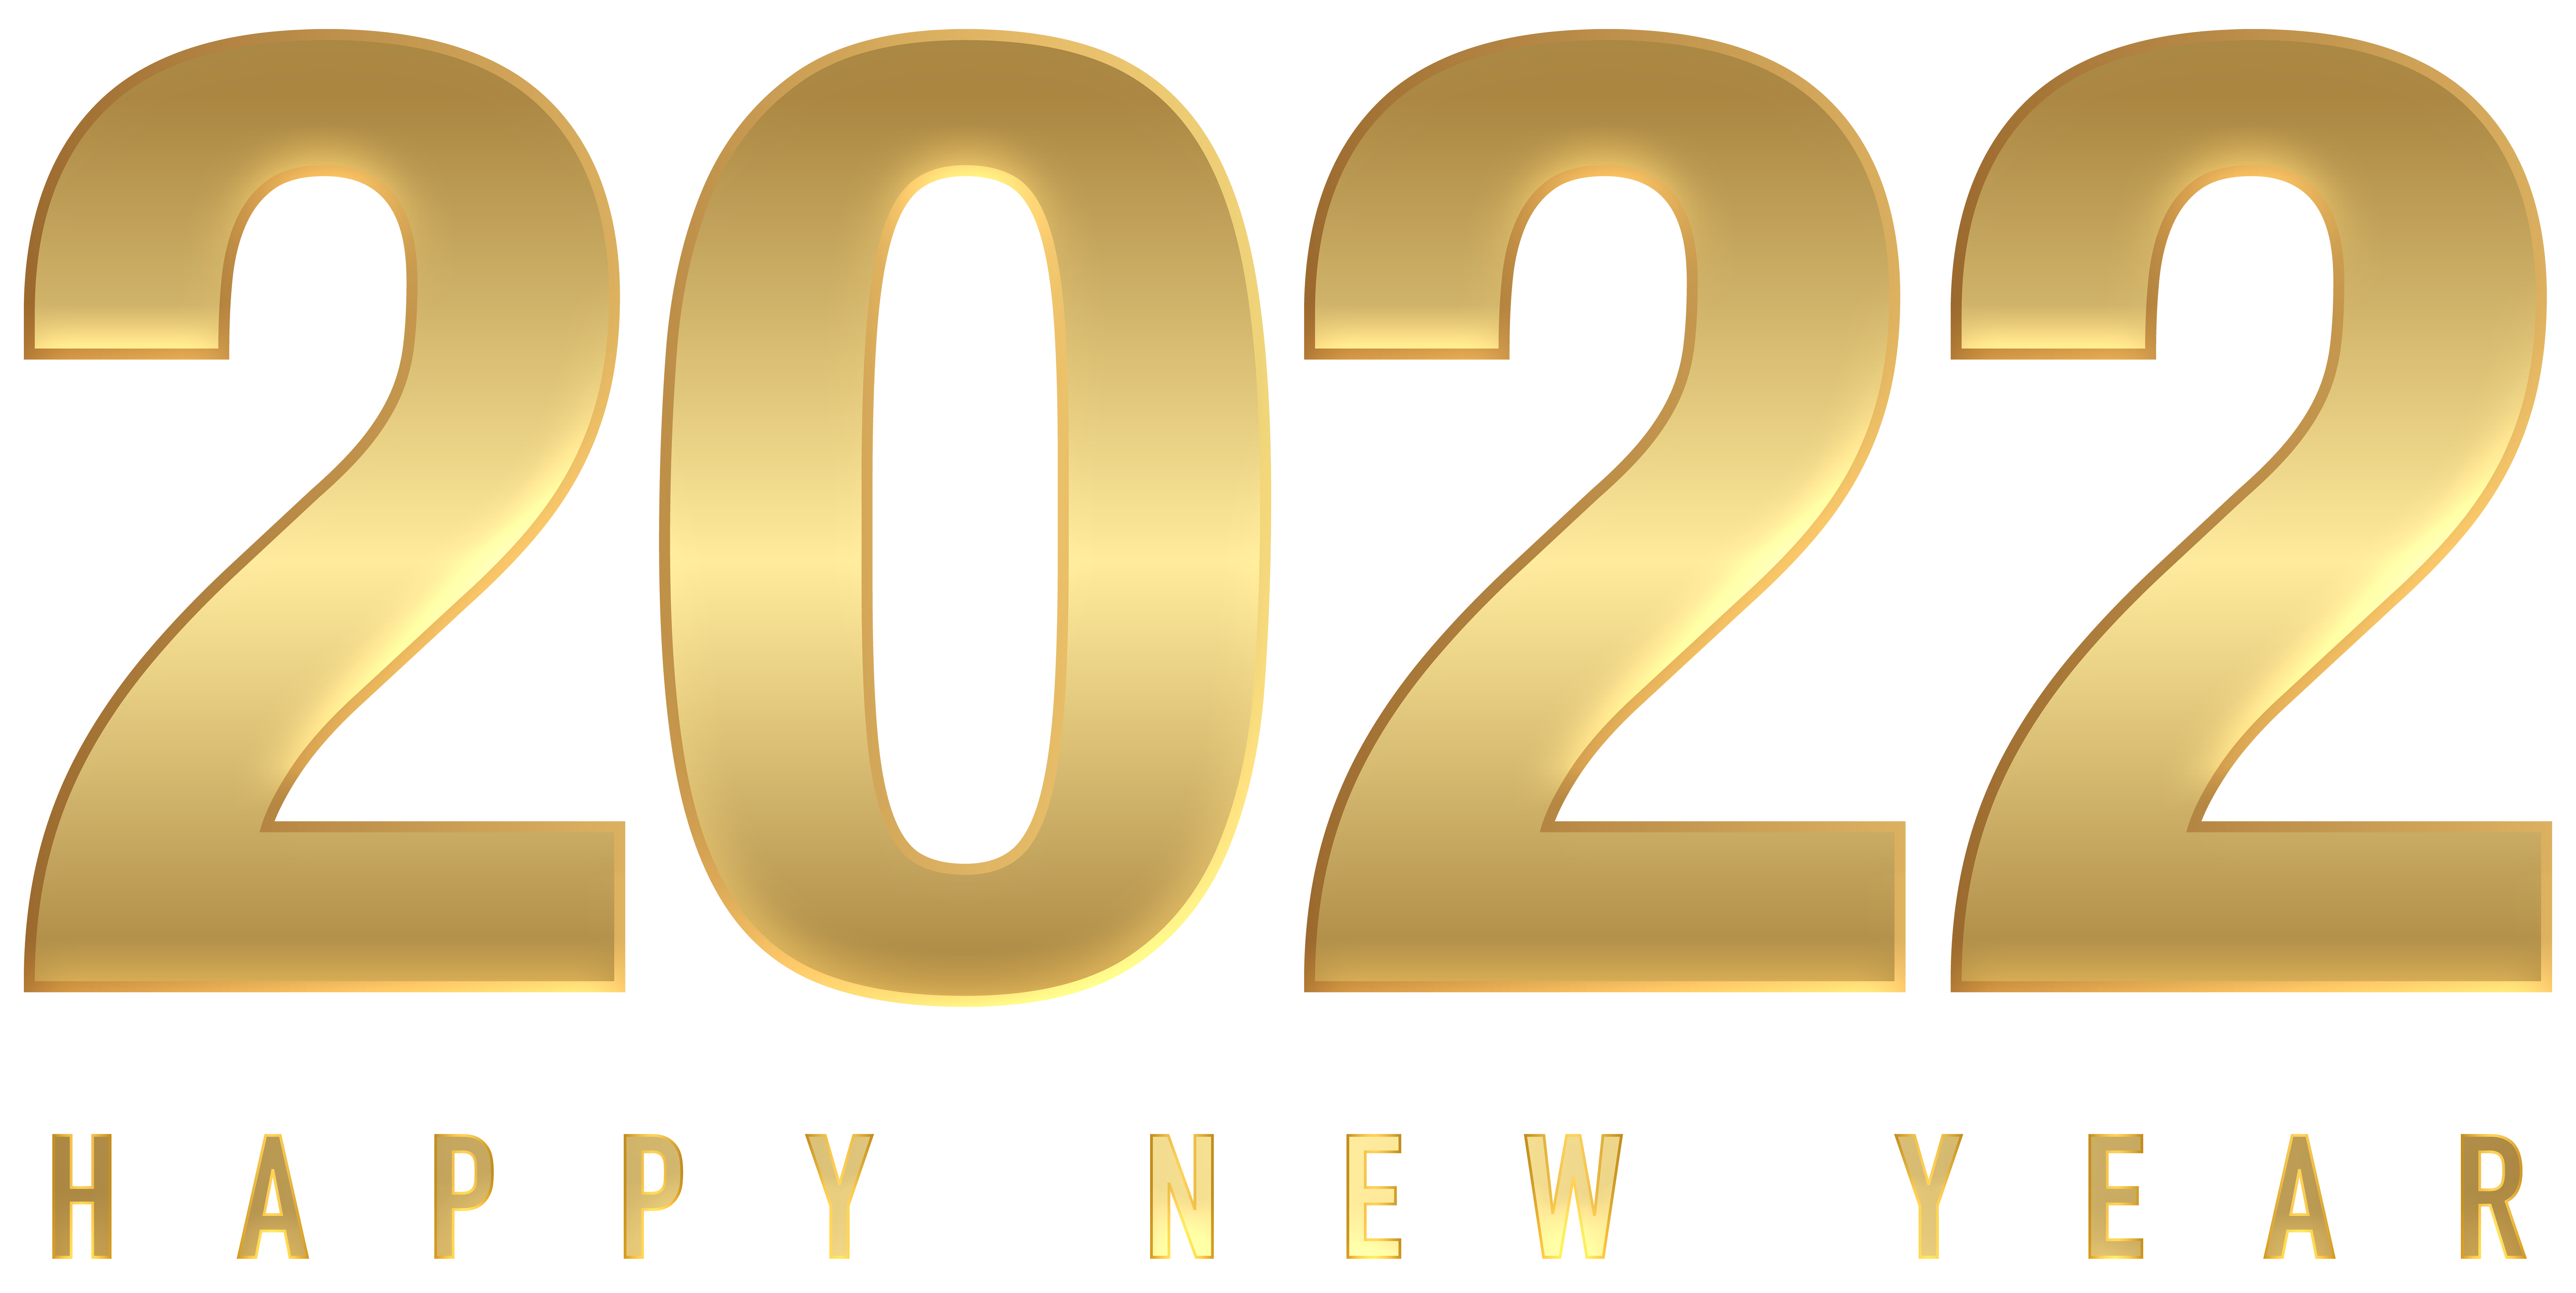 new years images clip art